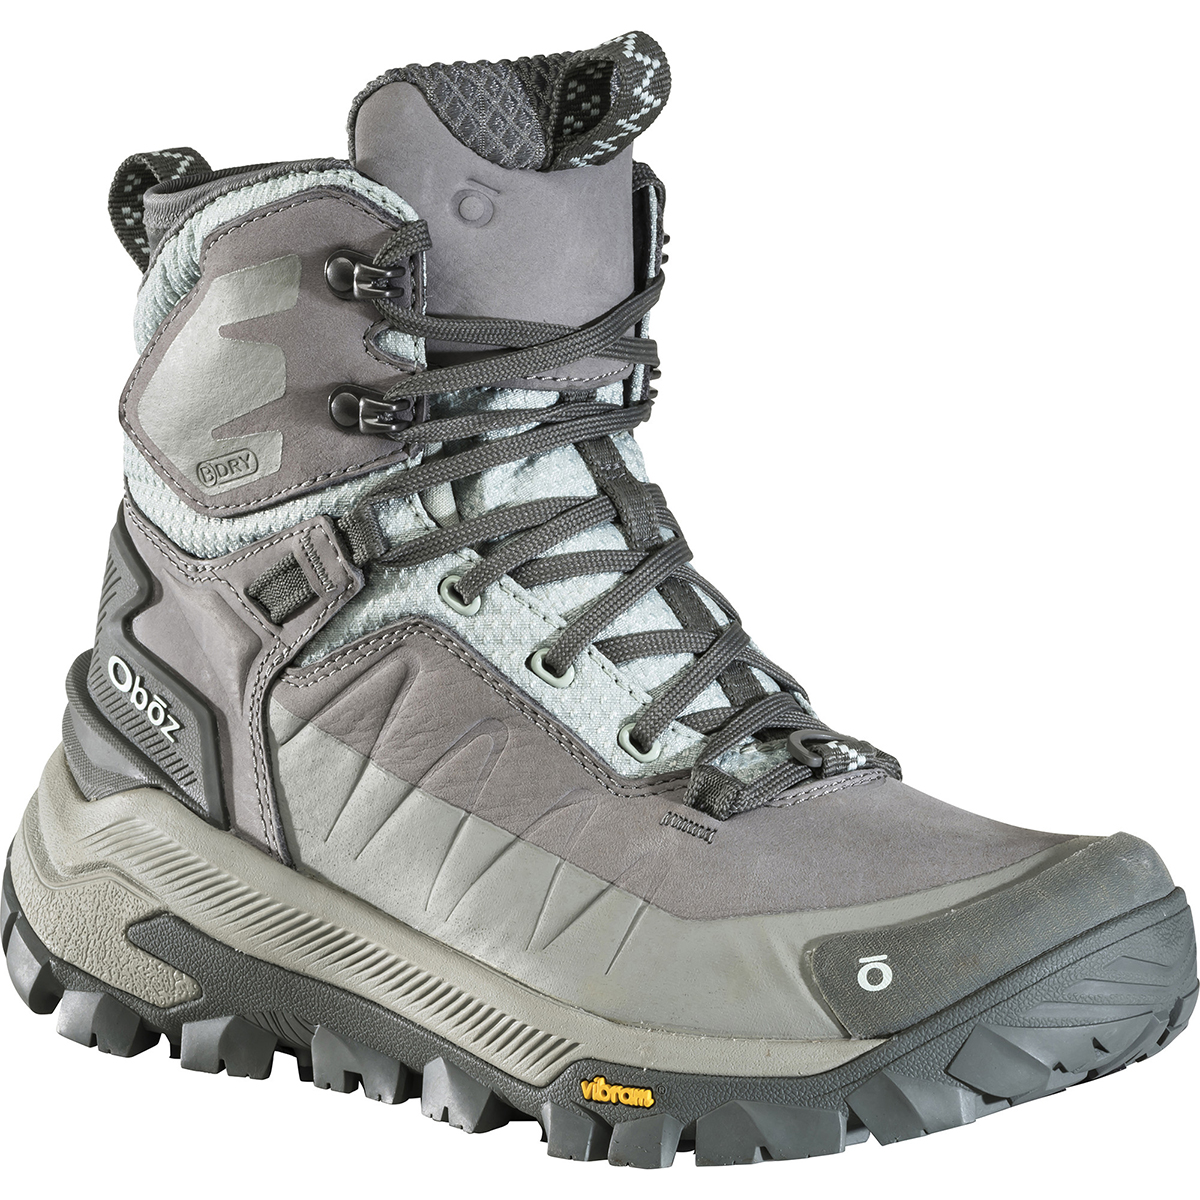 Oboz Women's Bangtail Mid Insulated Waterproof Storm Boots - Size 11